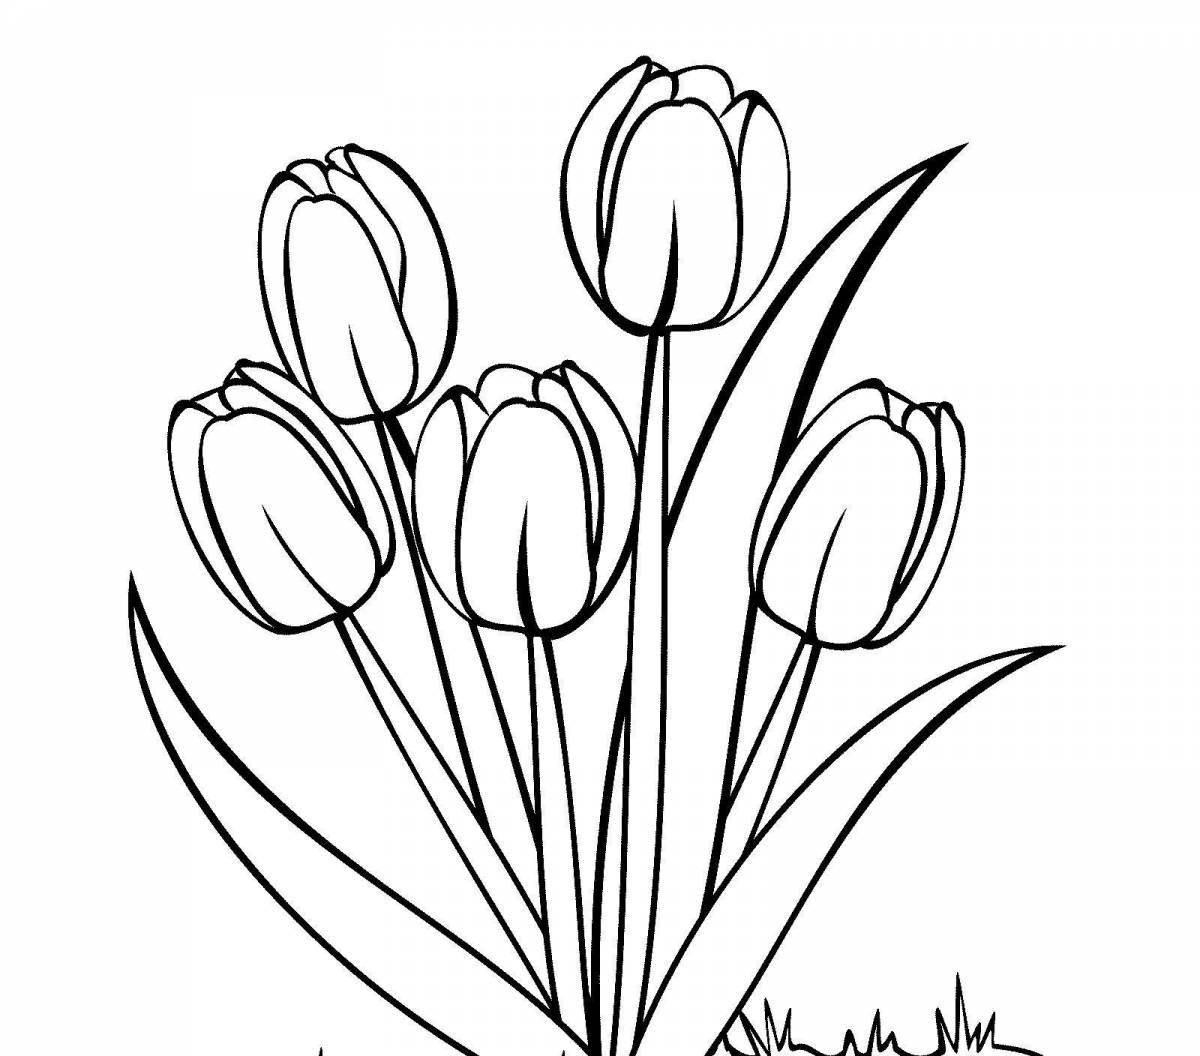 Colourful spring flowers coloring book